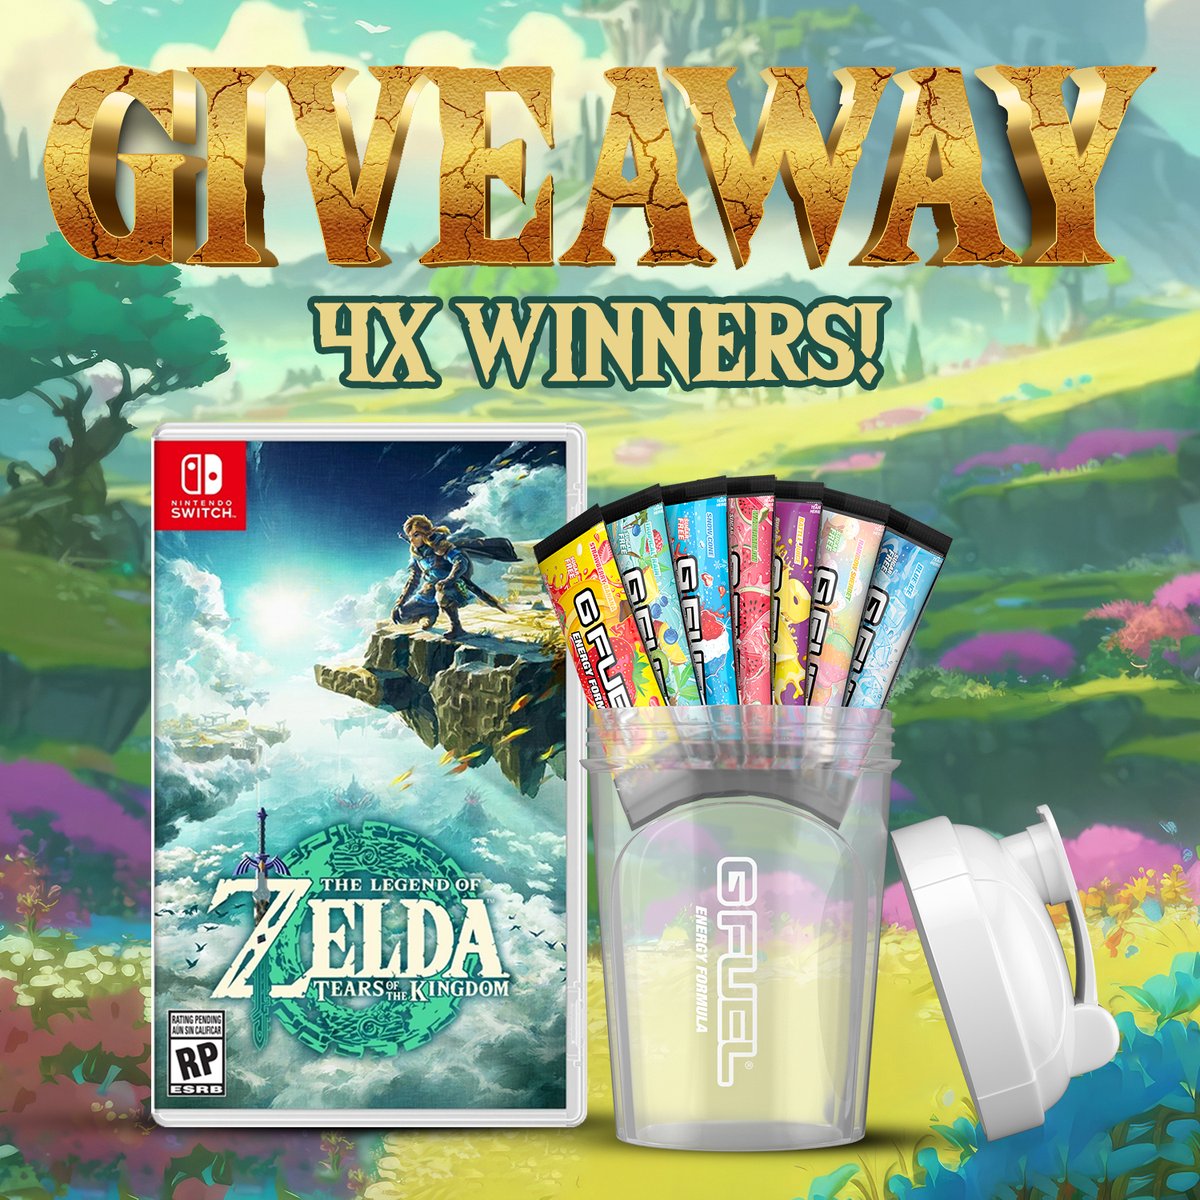 💚 𝐋𝐈𝐊𝐄 + 𝐑𝐓 + 𝐅𝐎𝐋𝐋𝐎𝐖 to win a #TearsOfTheKingdom Game Copy + #GFUEL Starter Kit! 4 LUCKY WINNERS picked on Monday! Good luck! 🤩